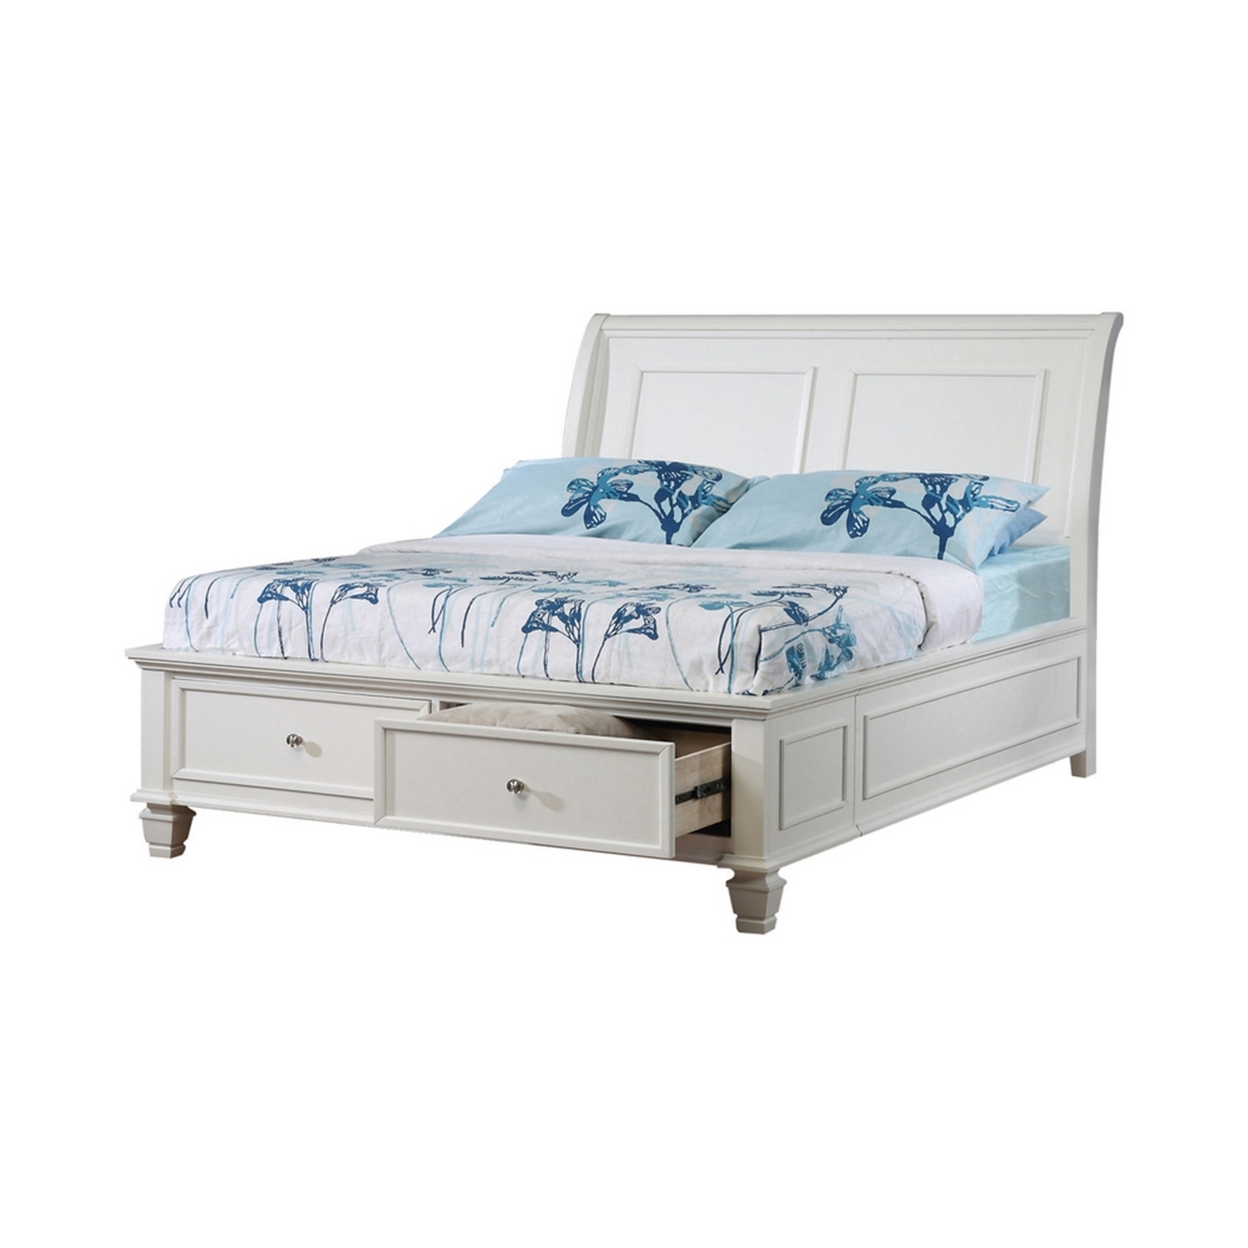 Wooden Twin Bed With Outwardly Curved Headboard And Bottom Drawers, White- Saltoro Sherpi